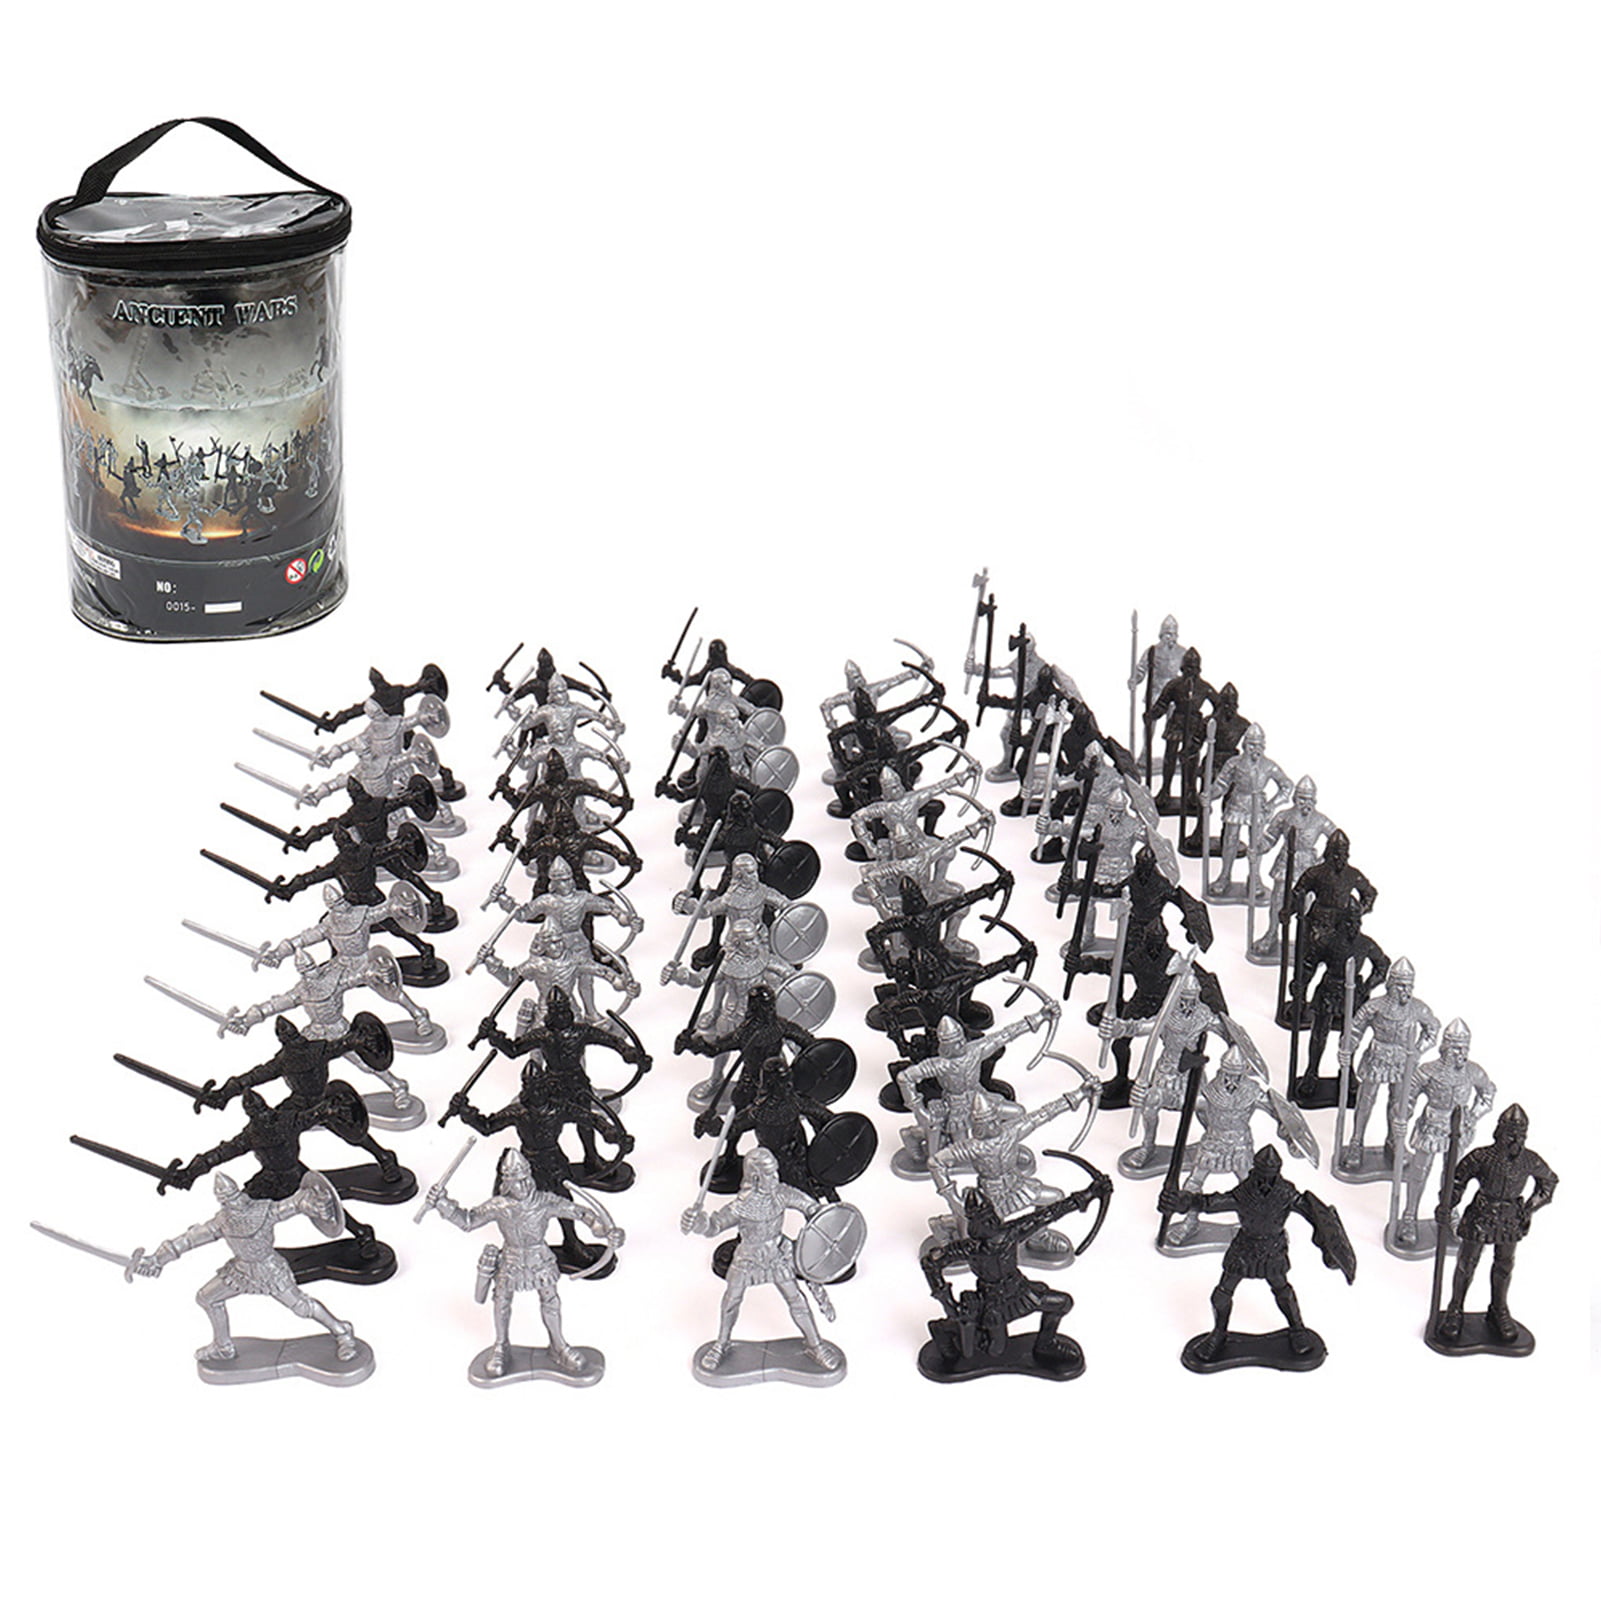 Medieval Knights Catapult Castle Soldiers Infantry Figures Accessory Playset